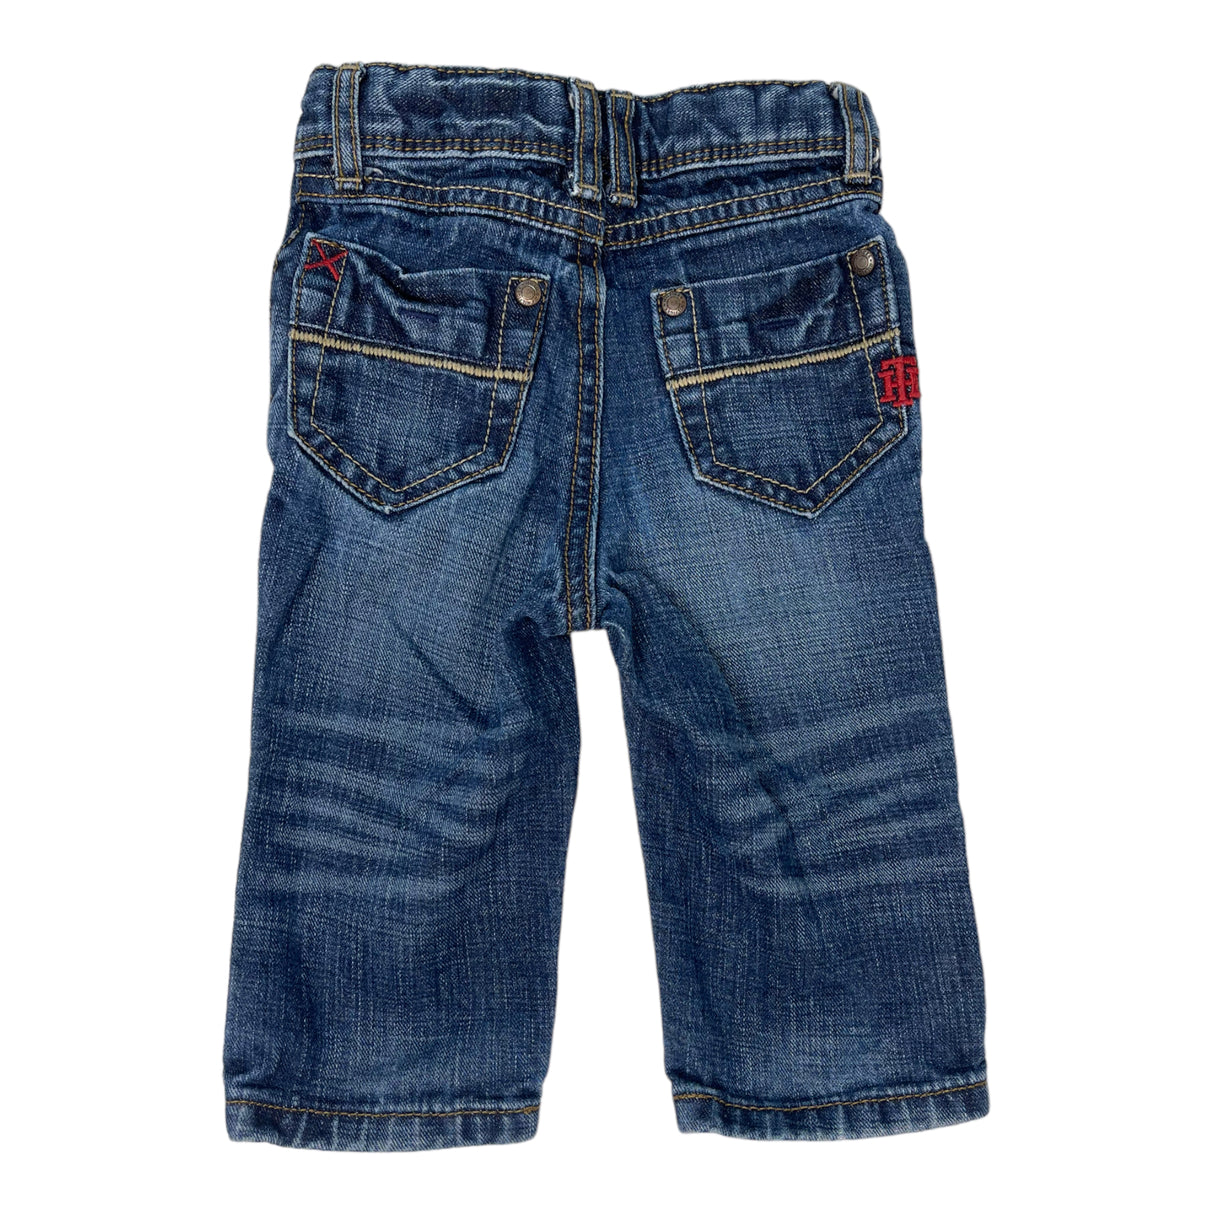 A Second Chance - Tommy Hilfiger 6-9M Pant Kids. - Delivery All Over Lebanon